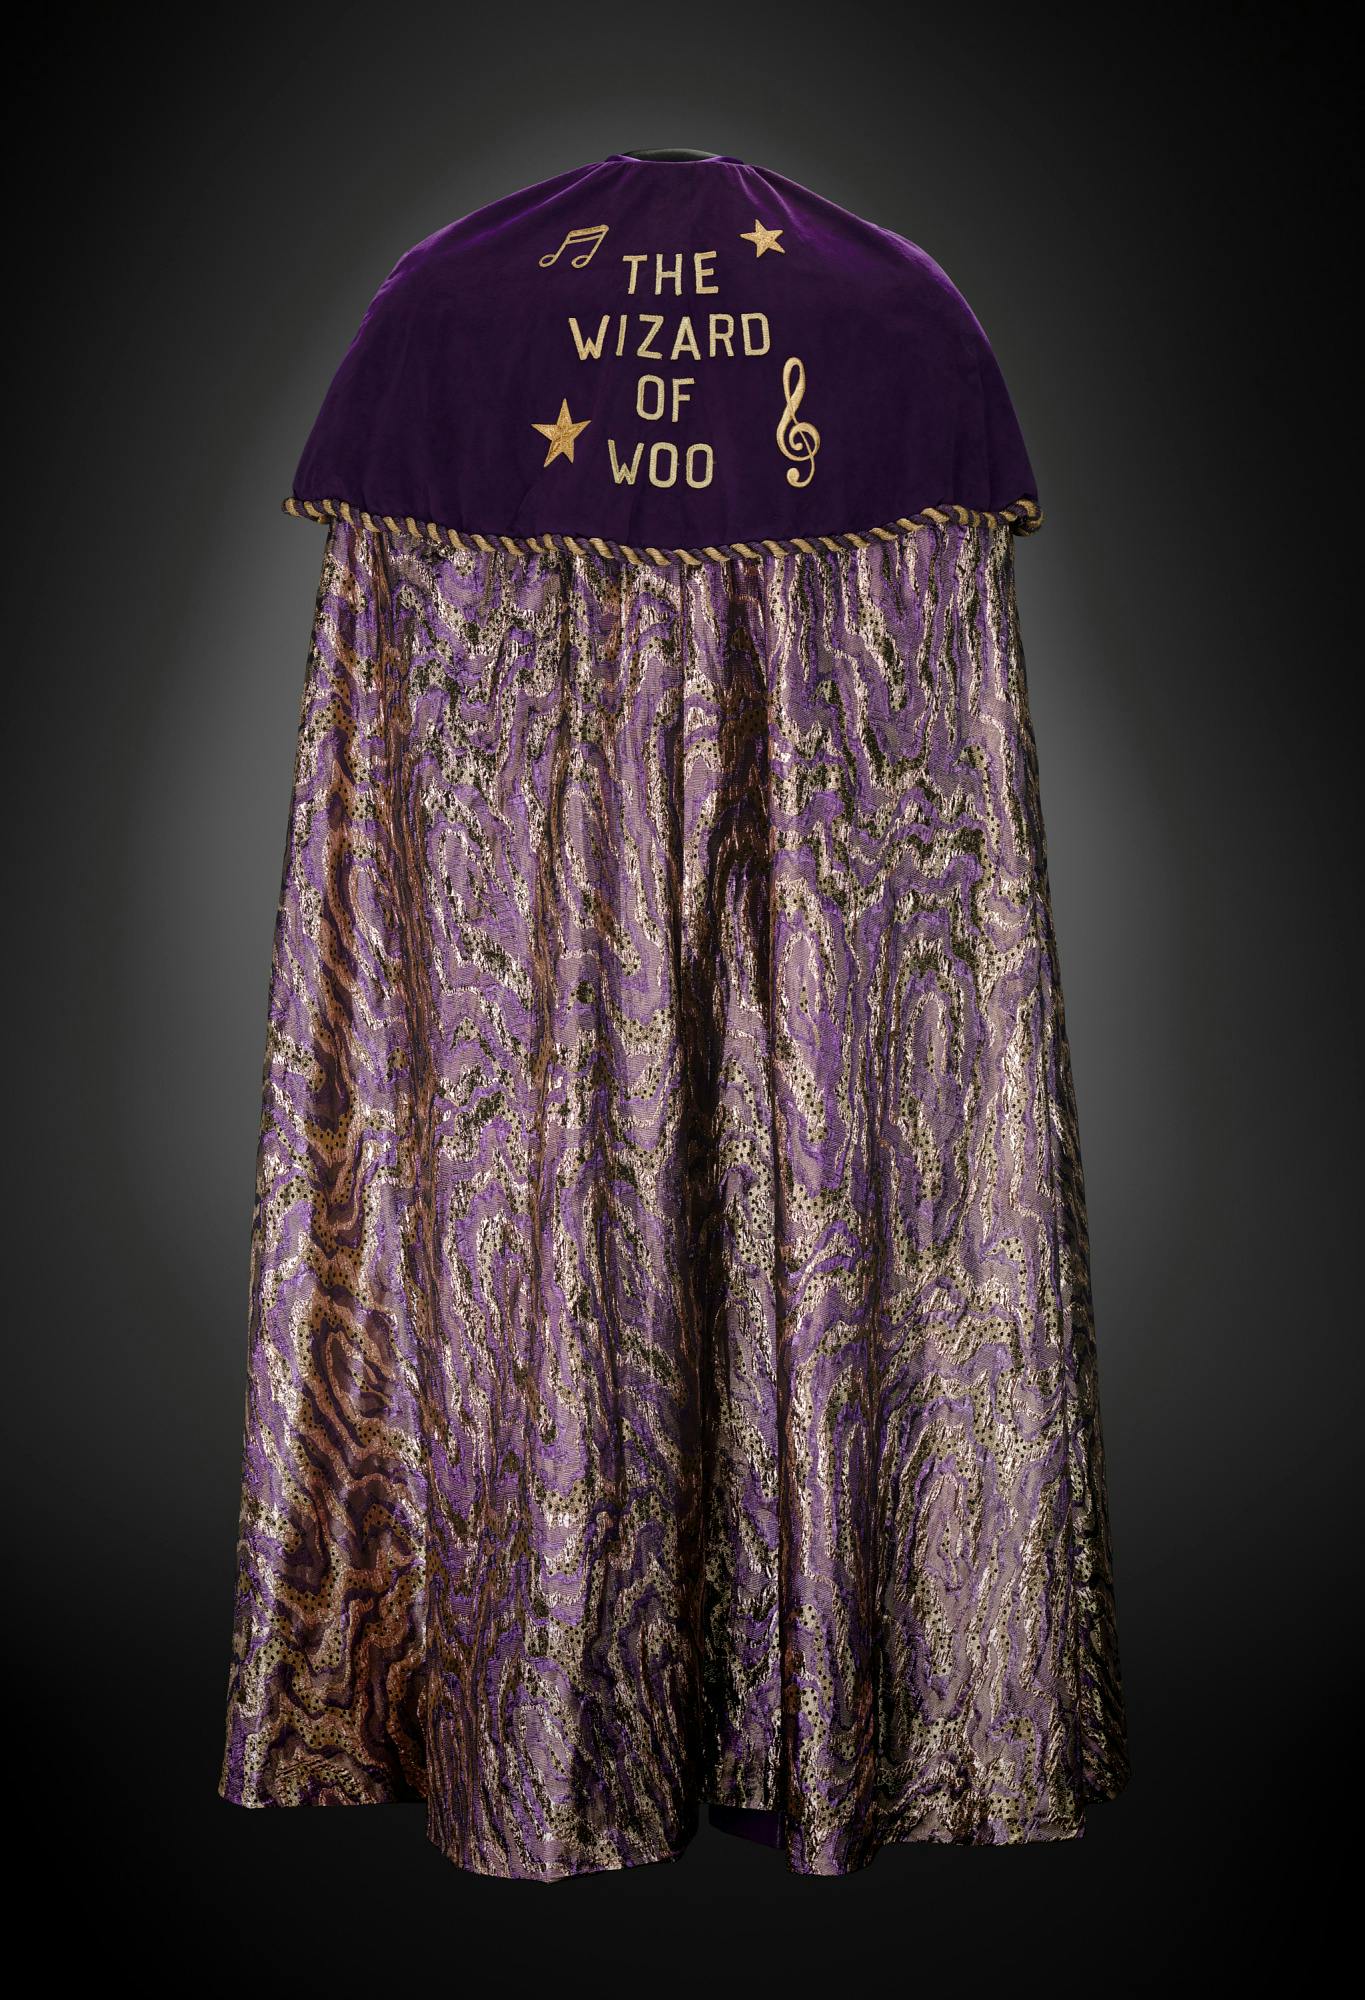 a purple cape with gold musical notes and stars stitched in and the words "The Wizard of Woo"